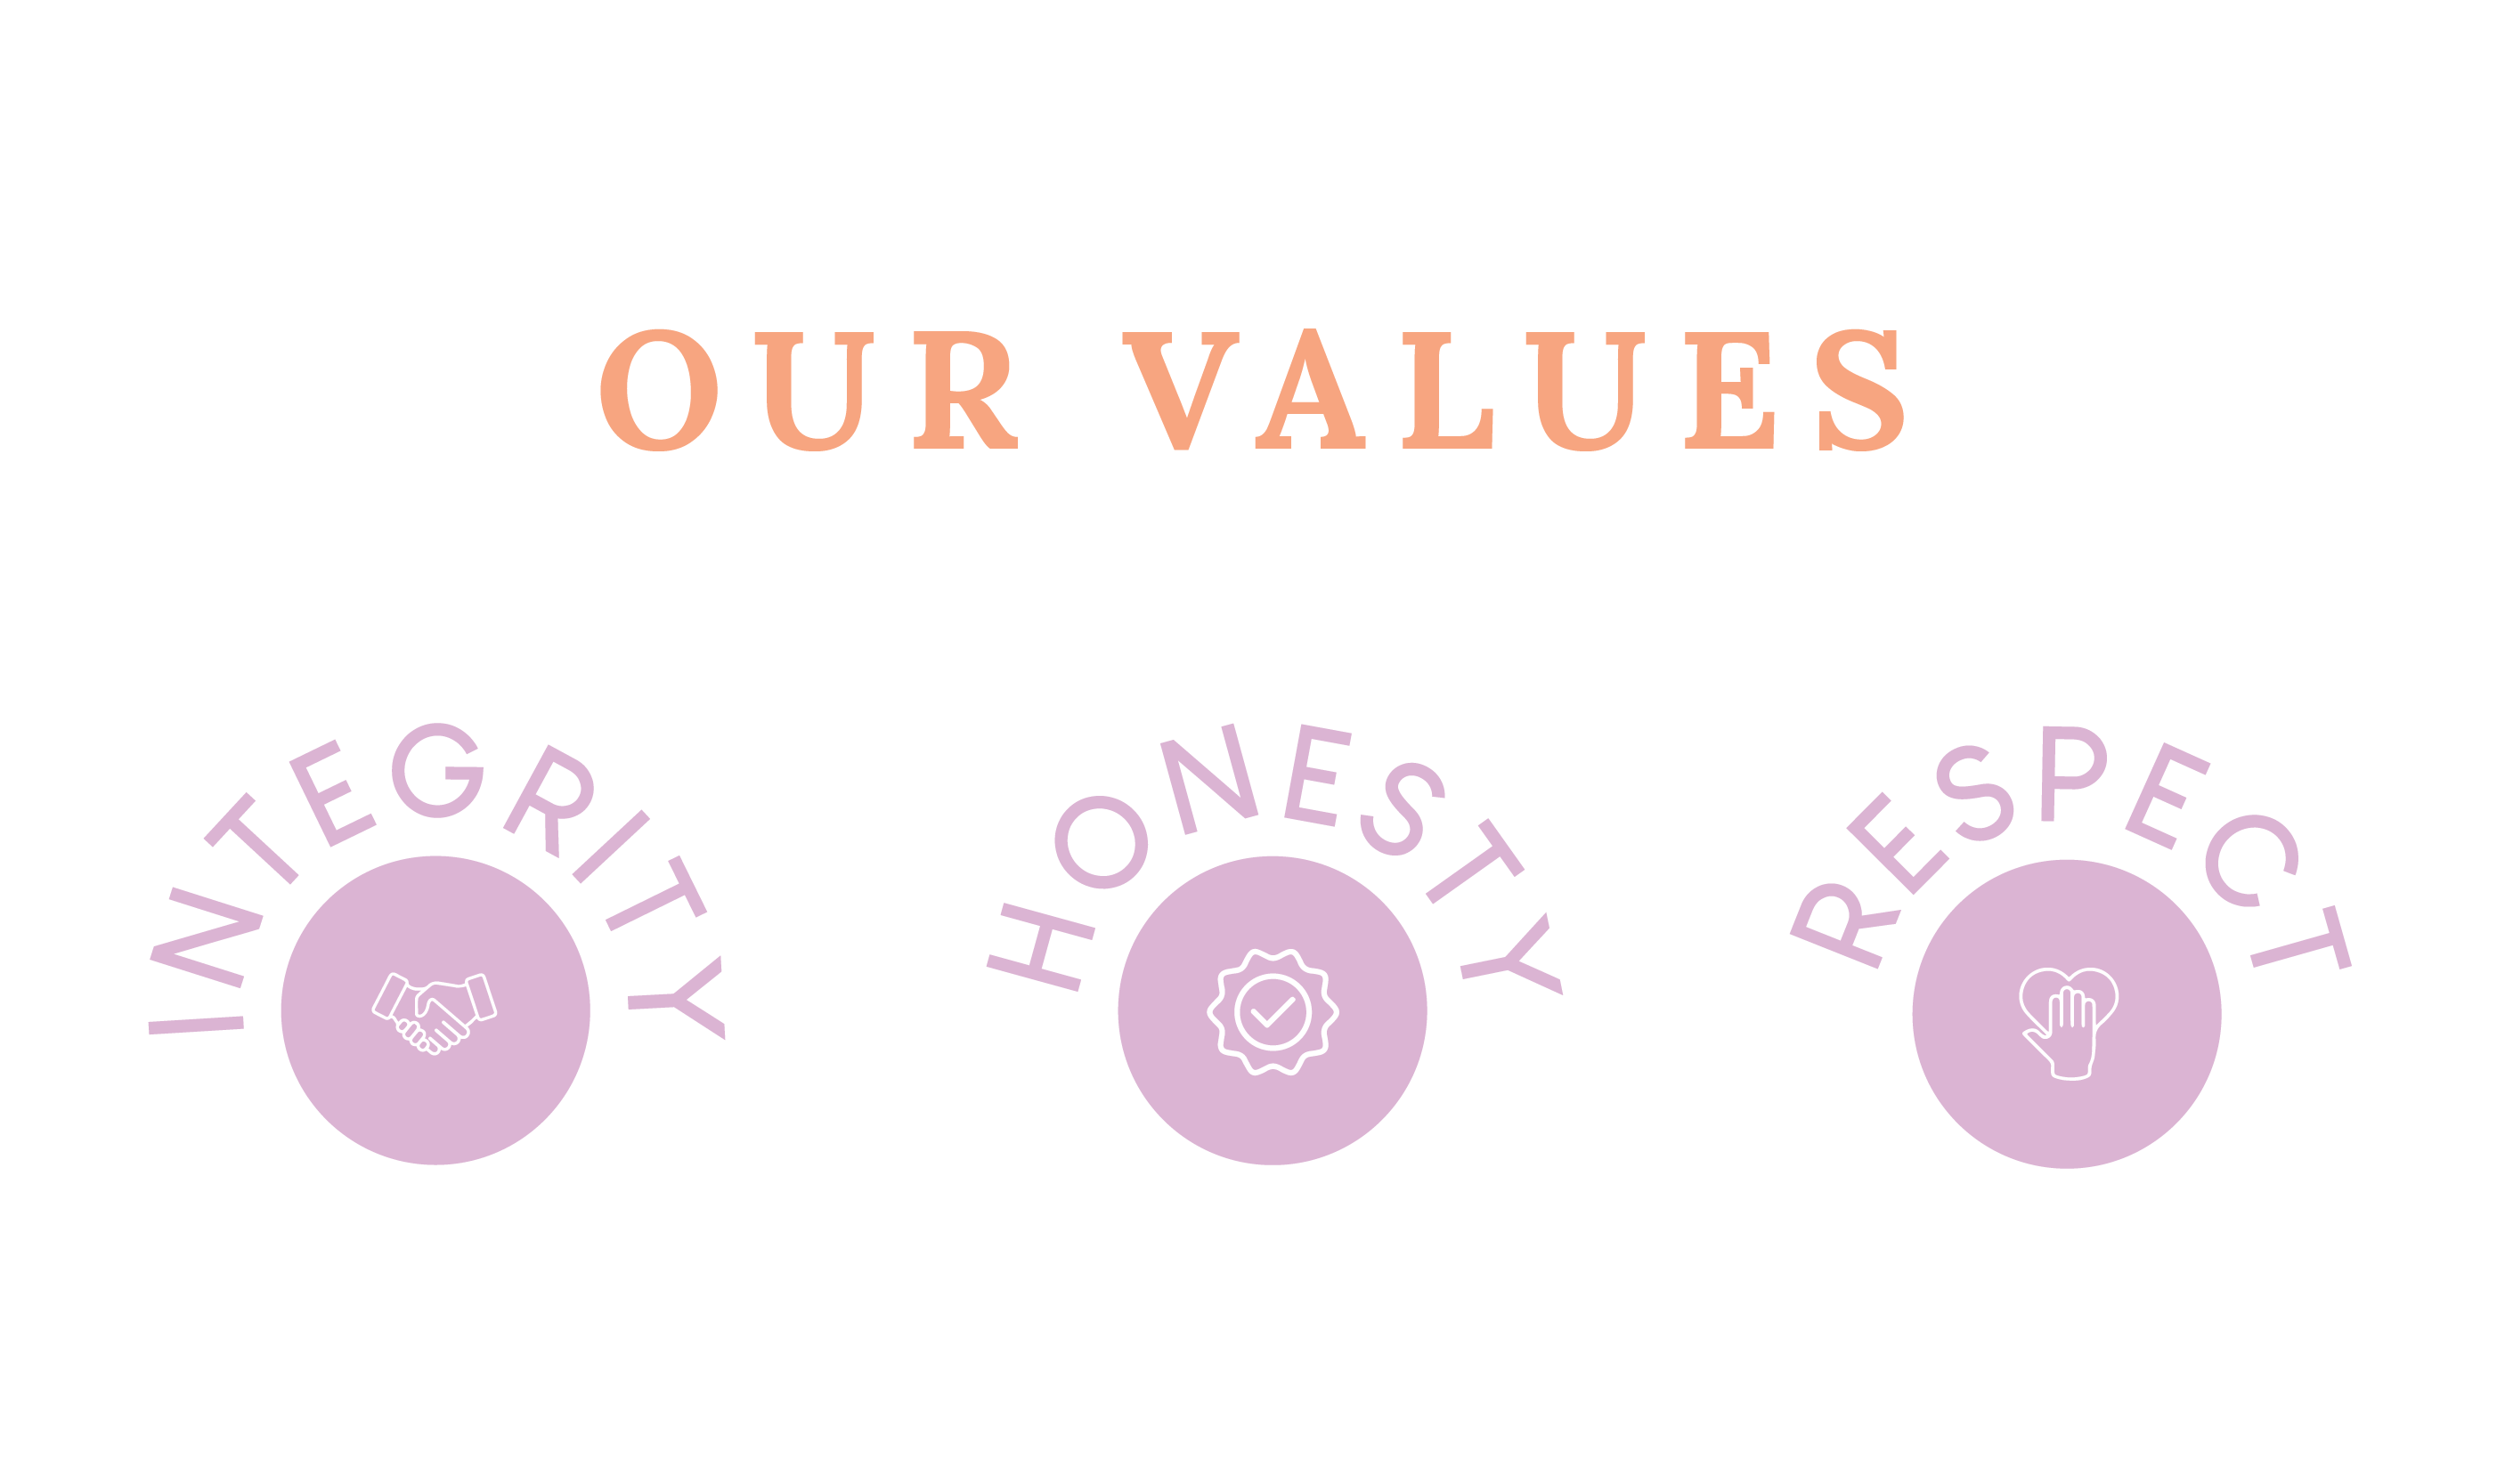 our values - integrity, honesty, respect